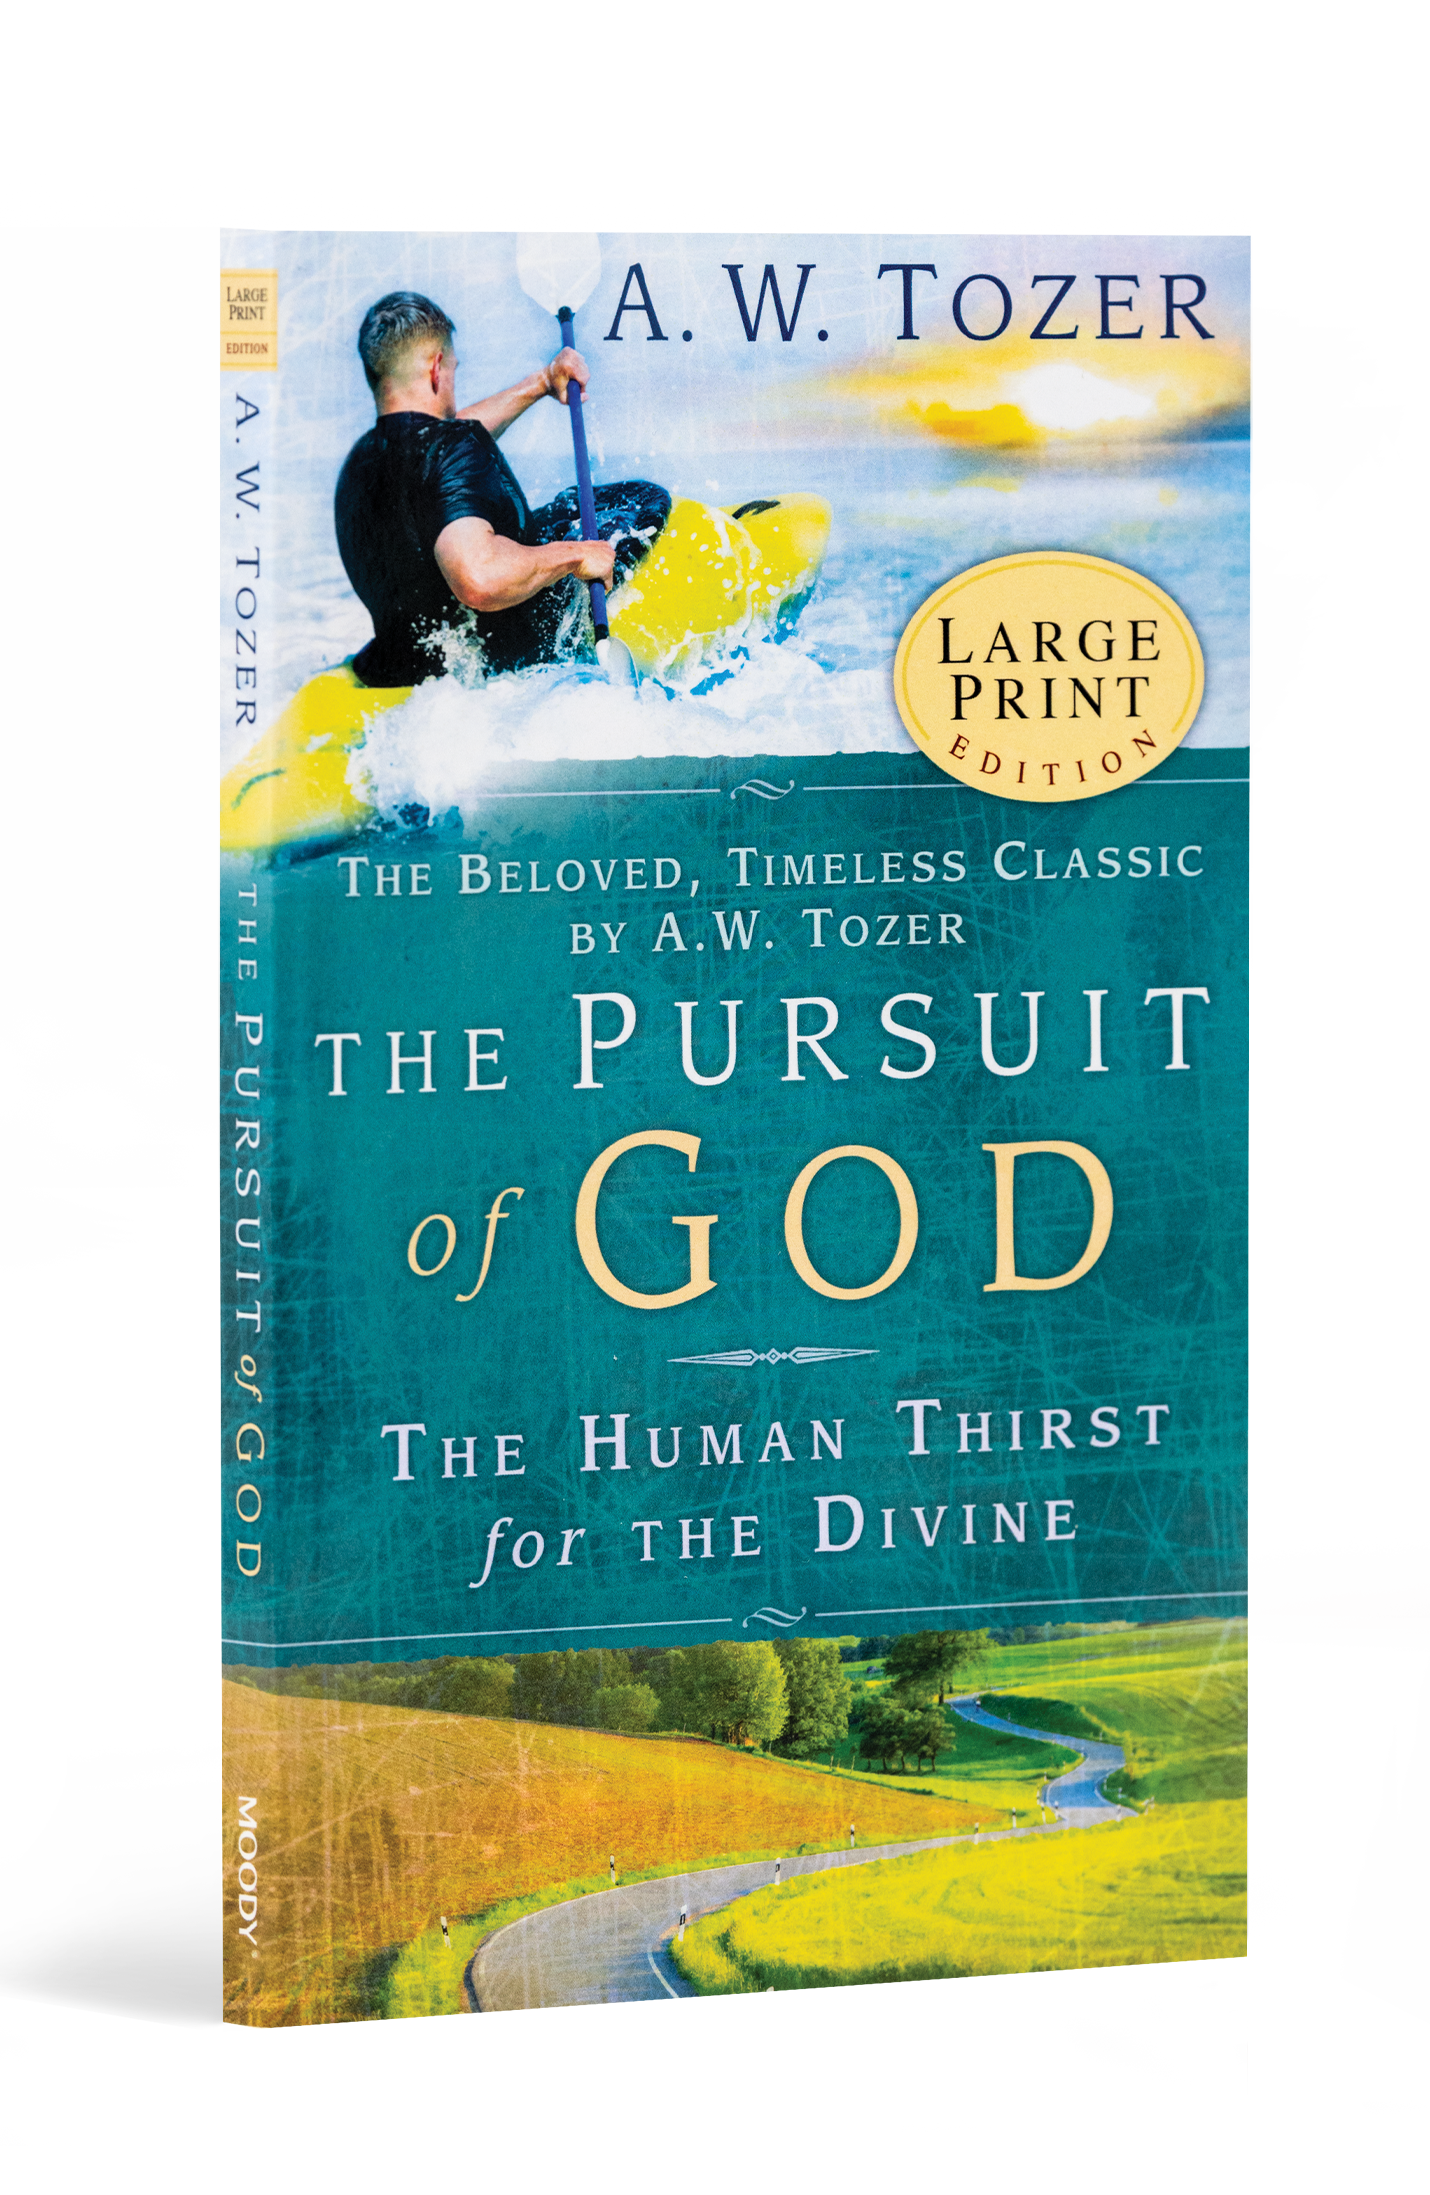 The Pursuit of God Book